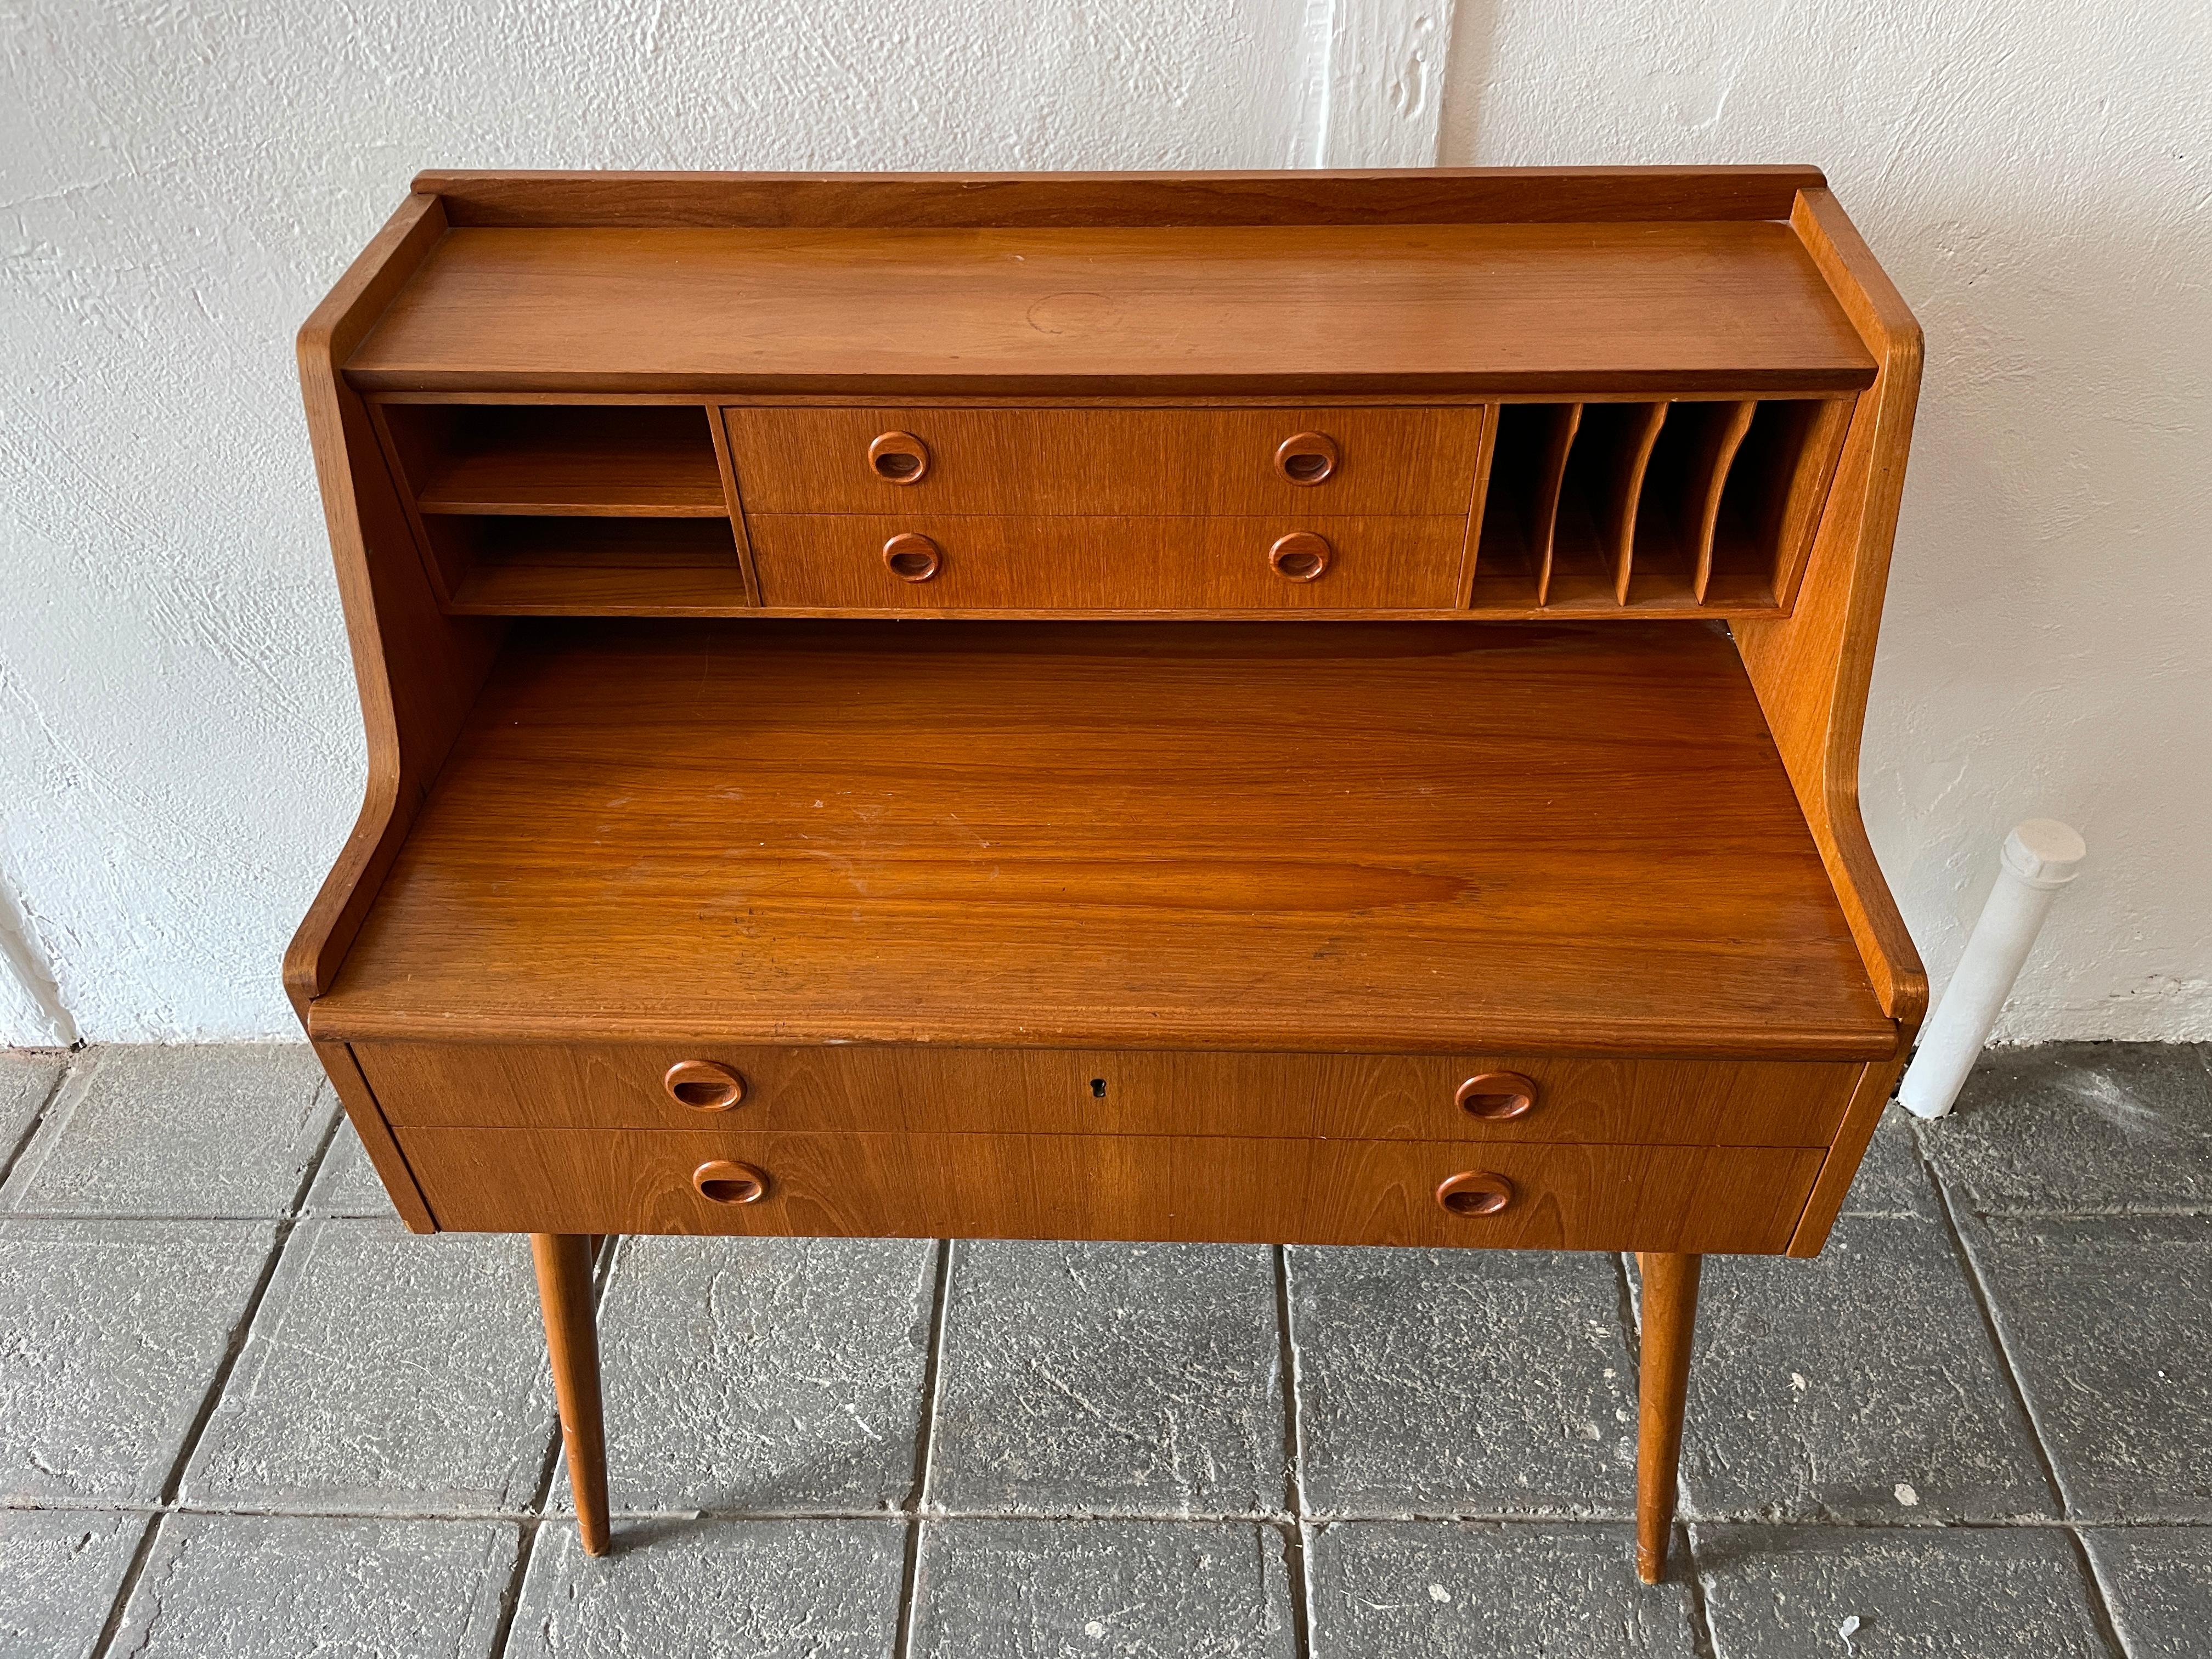 Swedish Mid-Century Modern teak desk with 4 drawers that have teak handles. Sits on tapered leg base. The drawers easily slide and are clean. original vintage condition and ready for use. Shows signs of use and patina. Desk surface slides forward